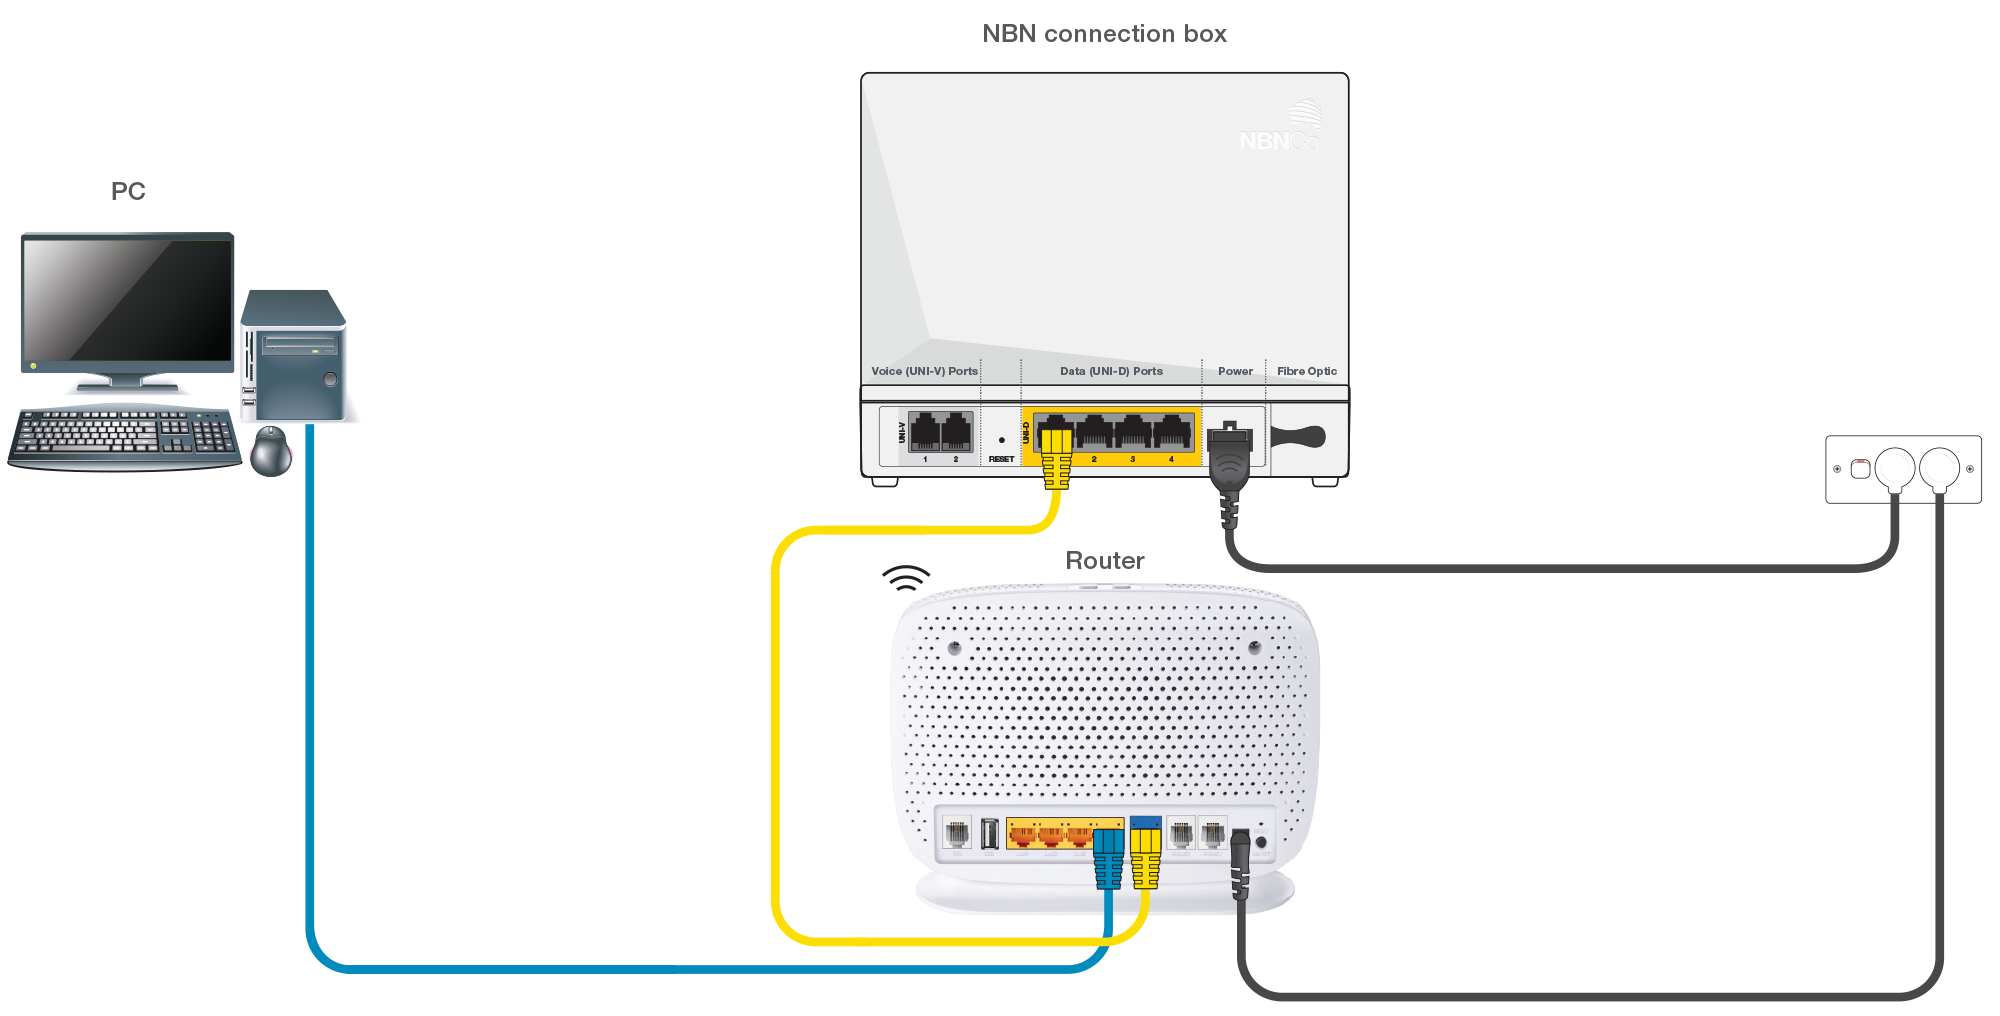 Plans with BYO modem – How to Connect Using your Compatible Modem/Router - TPG